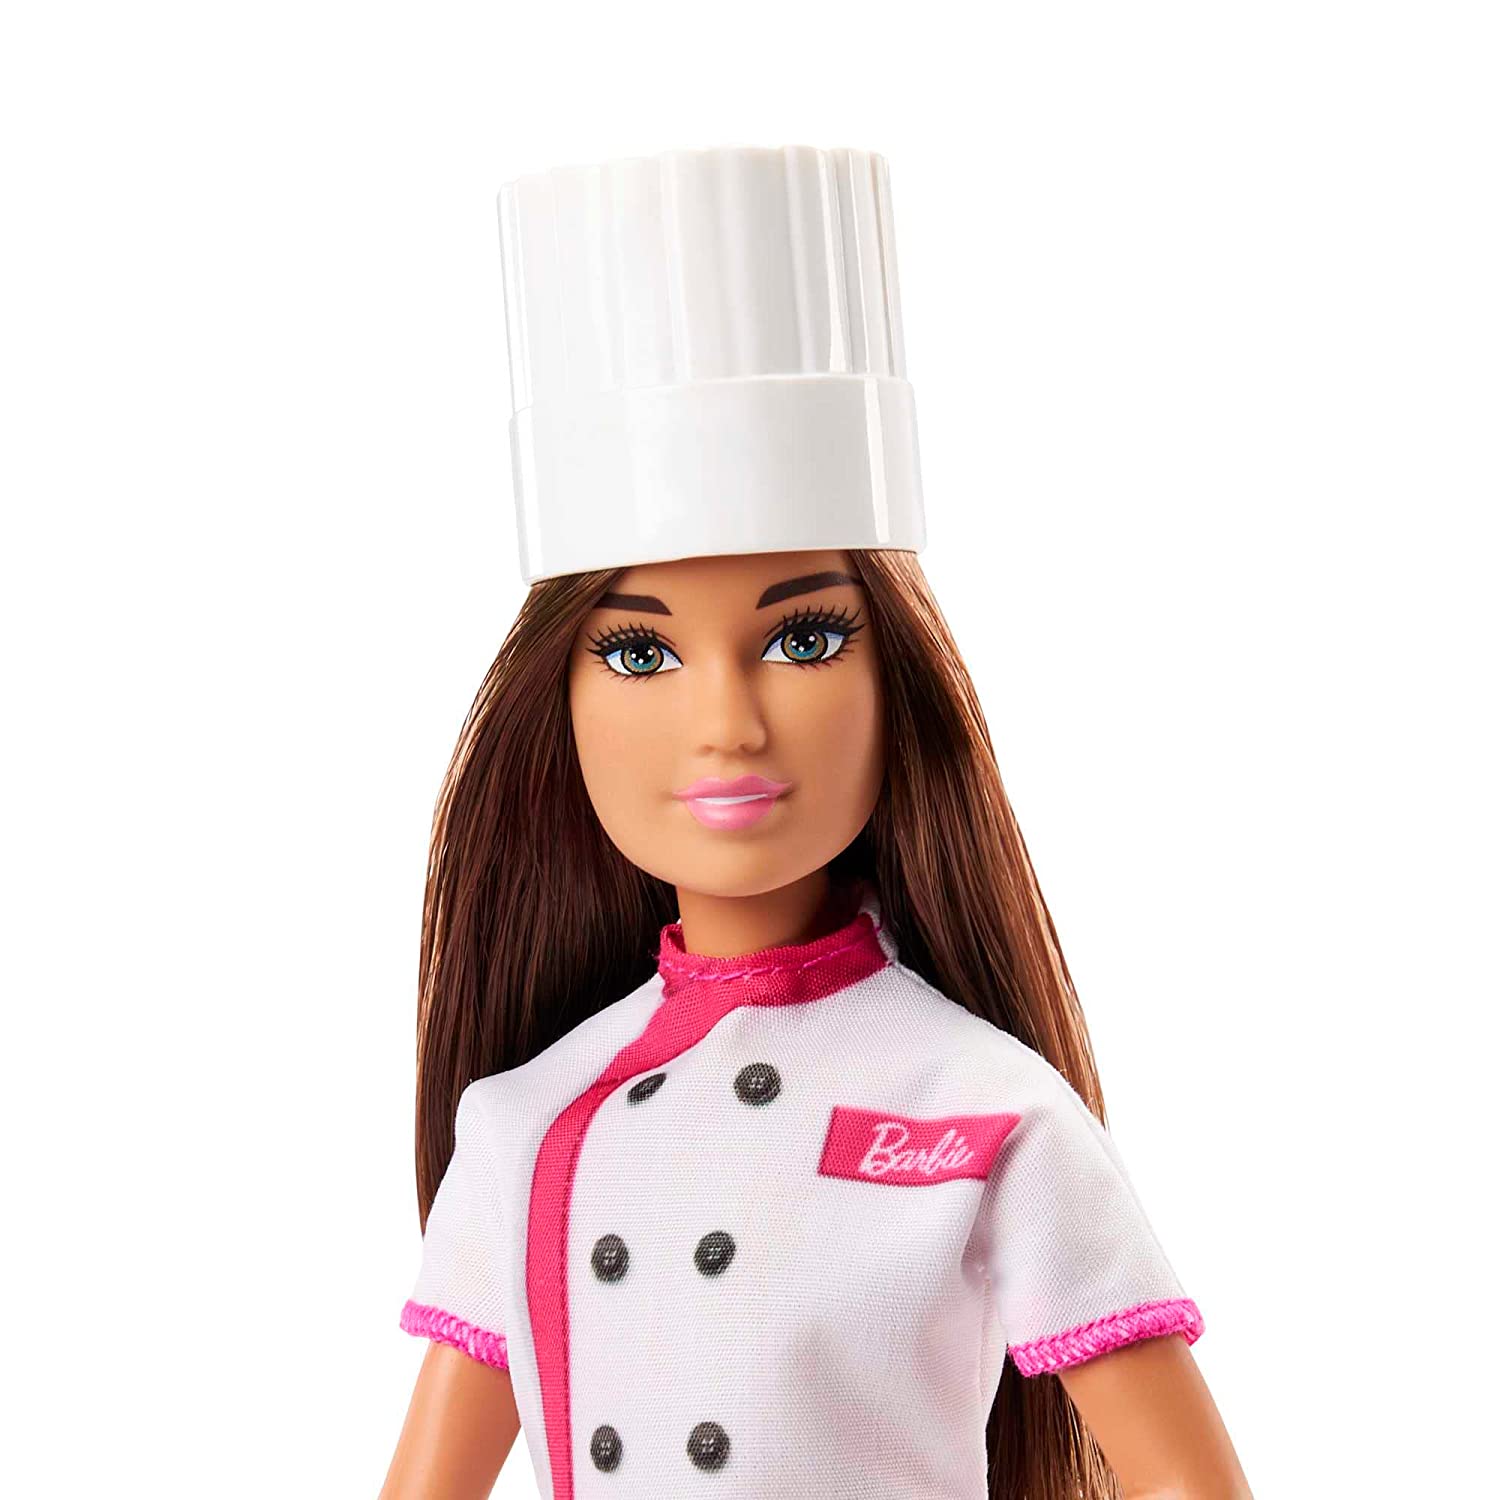 Barbie Pastry Chef Doll for Kids Ages 3 Years and Up